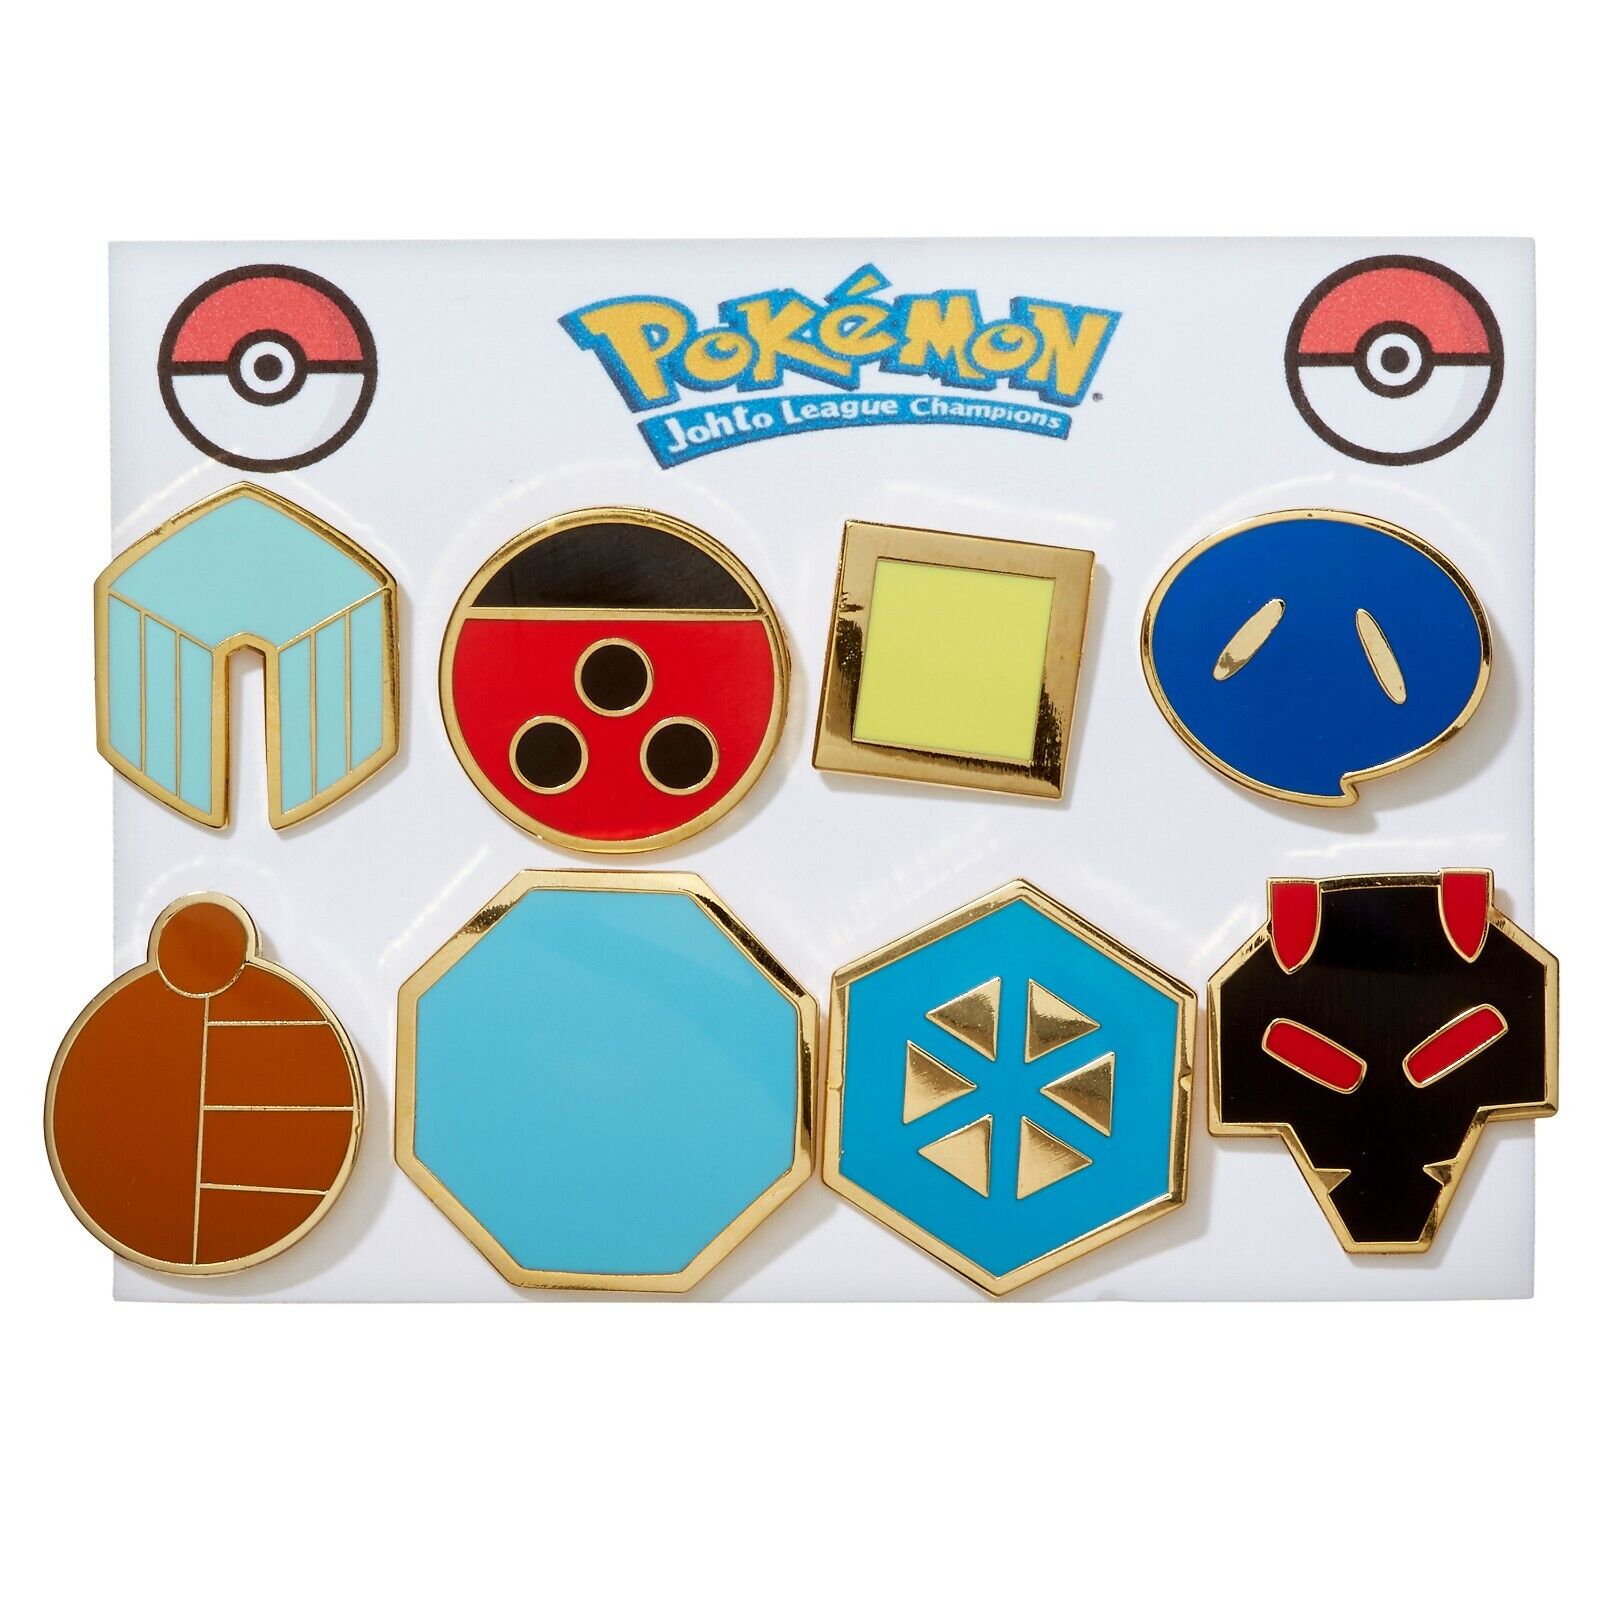 Pokemon Cartoon Anime All 8 Johto Gym Badges from Generation Gen 2 for Cosplay